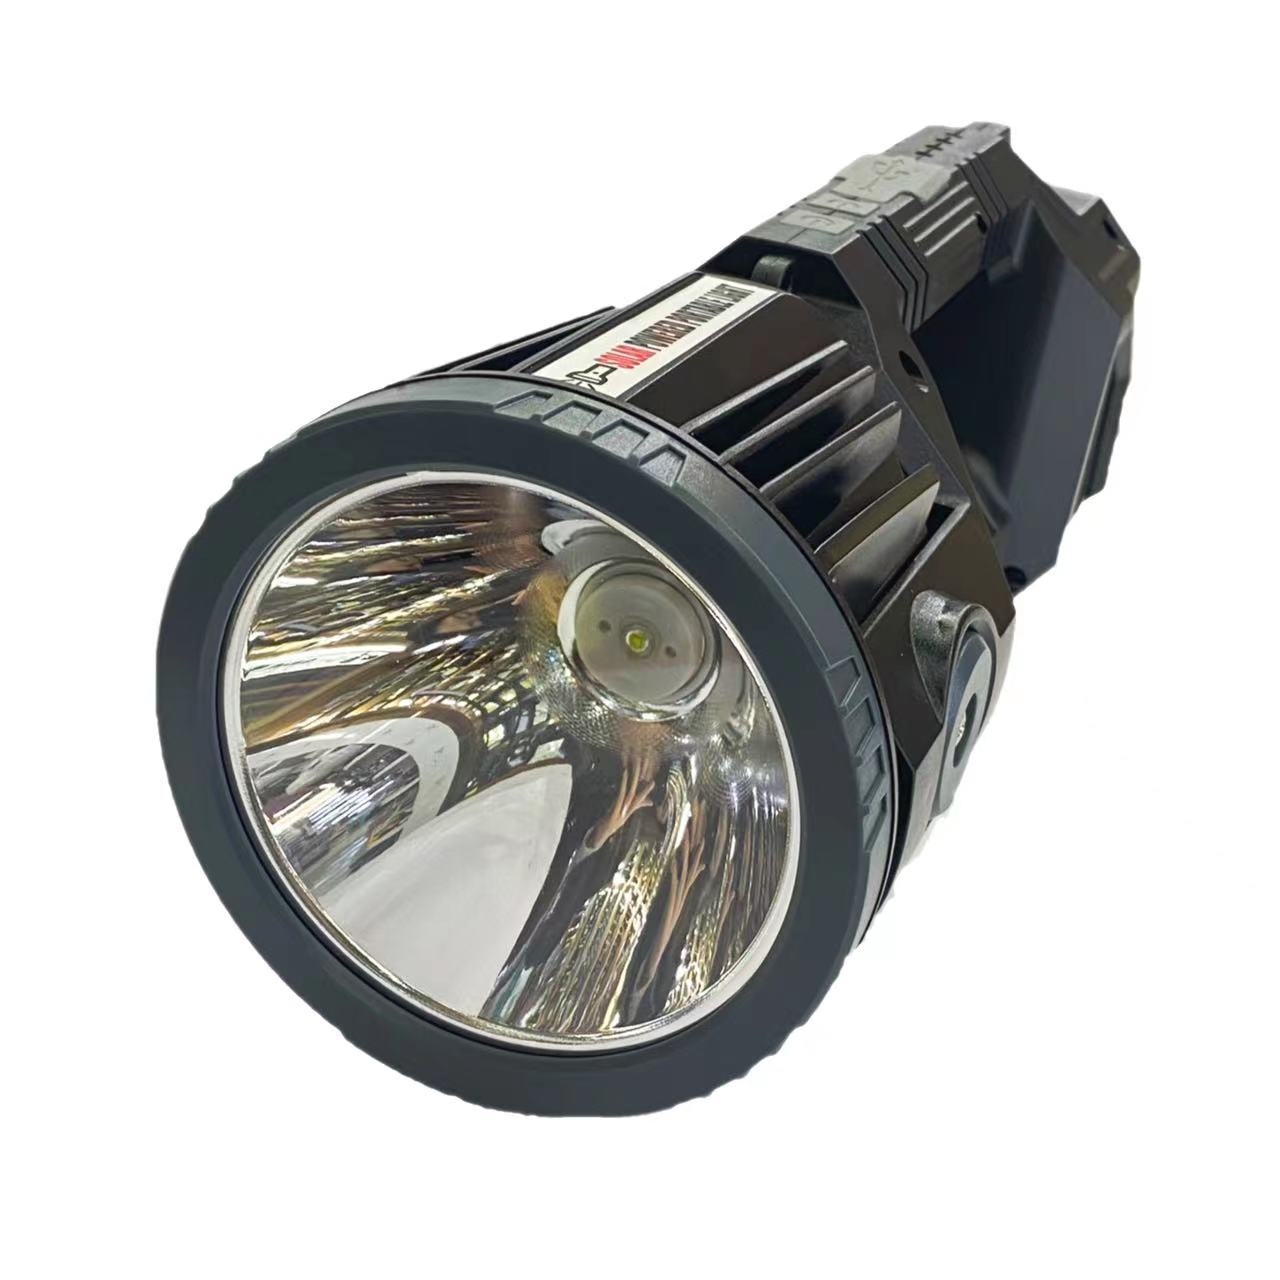 New Multi-Functional Strong Light Searchlight Rechargeable Long-Range Strong Light Portable Lamp Outdoor High-Power Lighting Strong Light Flashlight